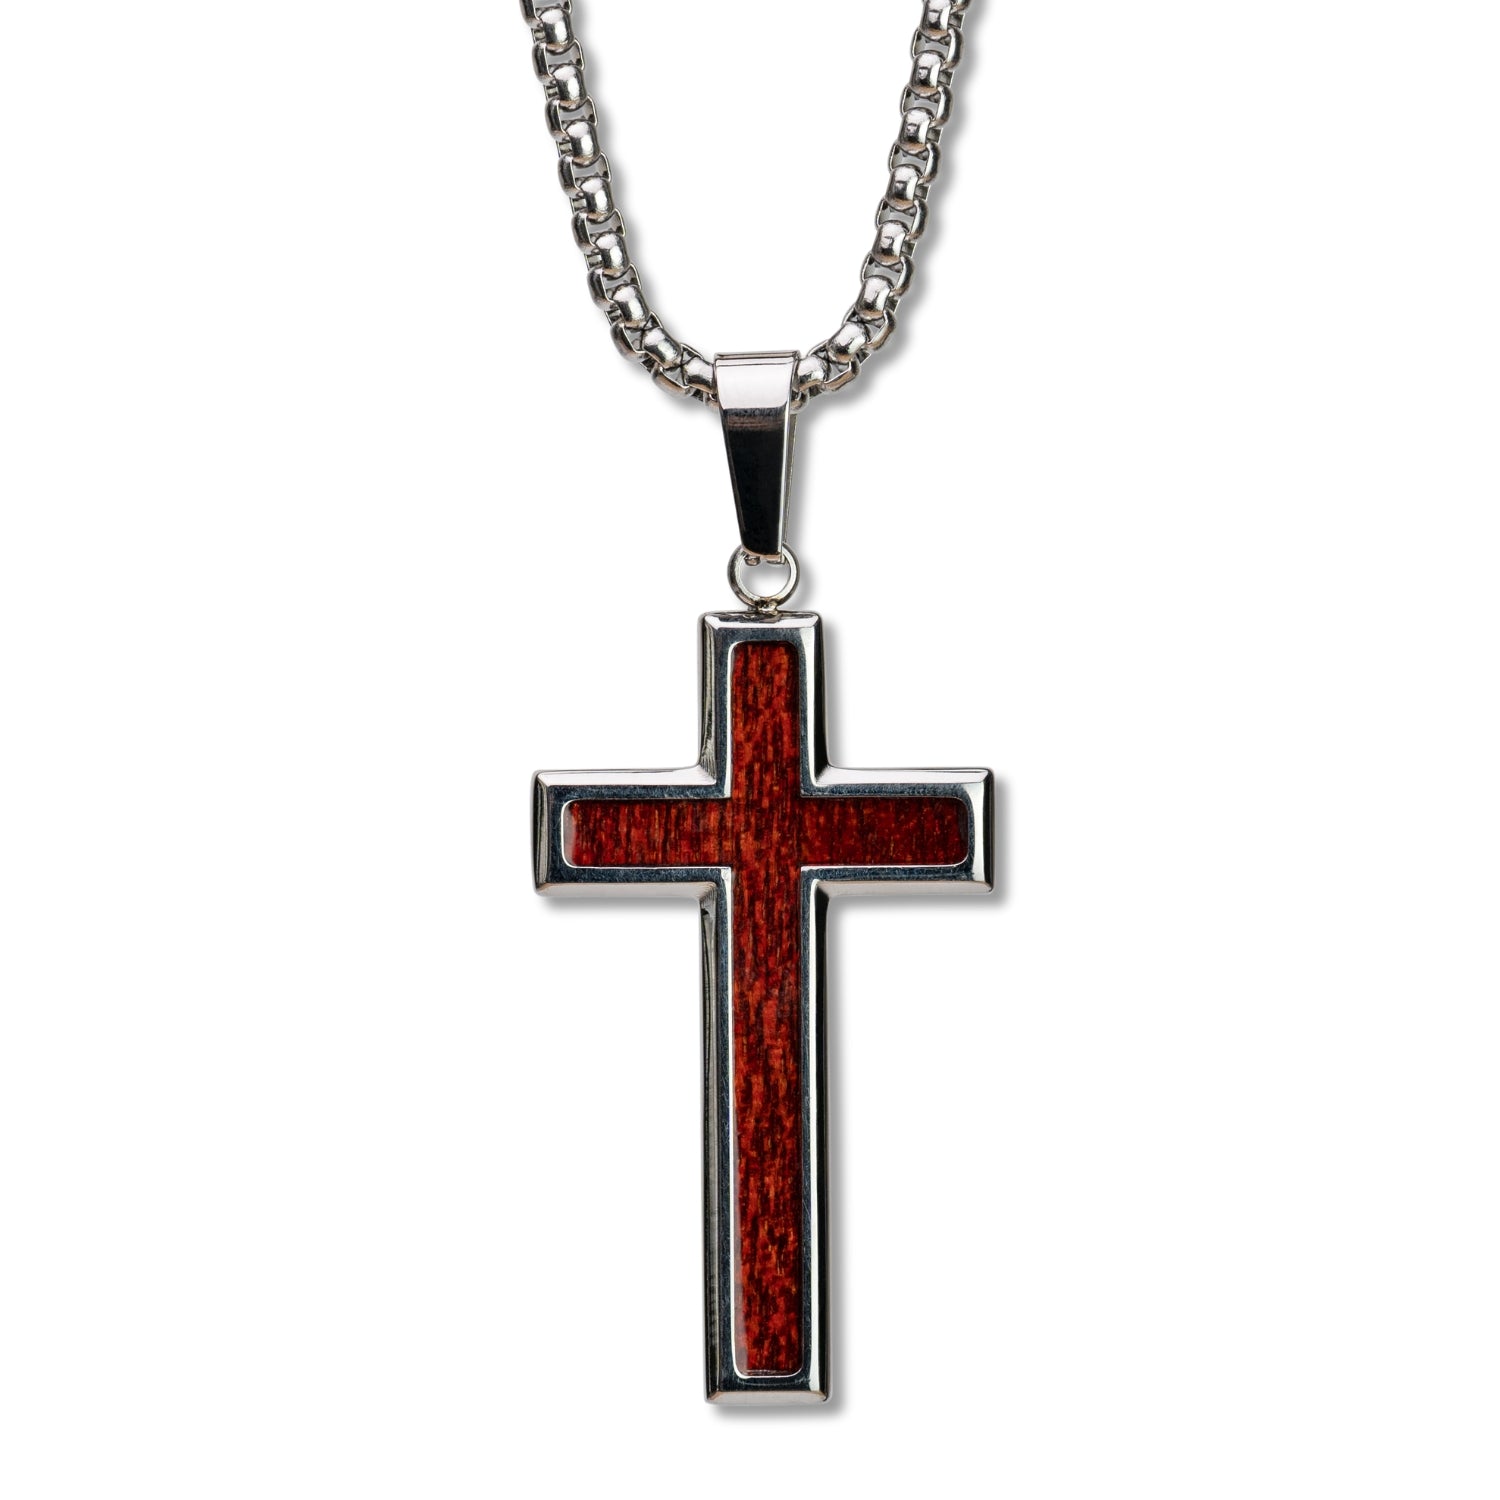 Silver Shoppee Women's Holy Cross, Sterling Silver Pendant with Chain  (SSPD0320A). : Amazon.in: Fashion